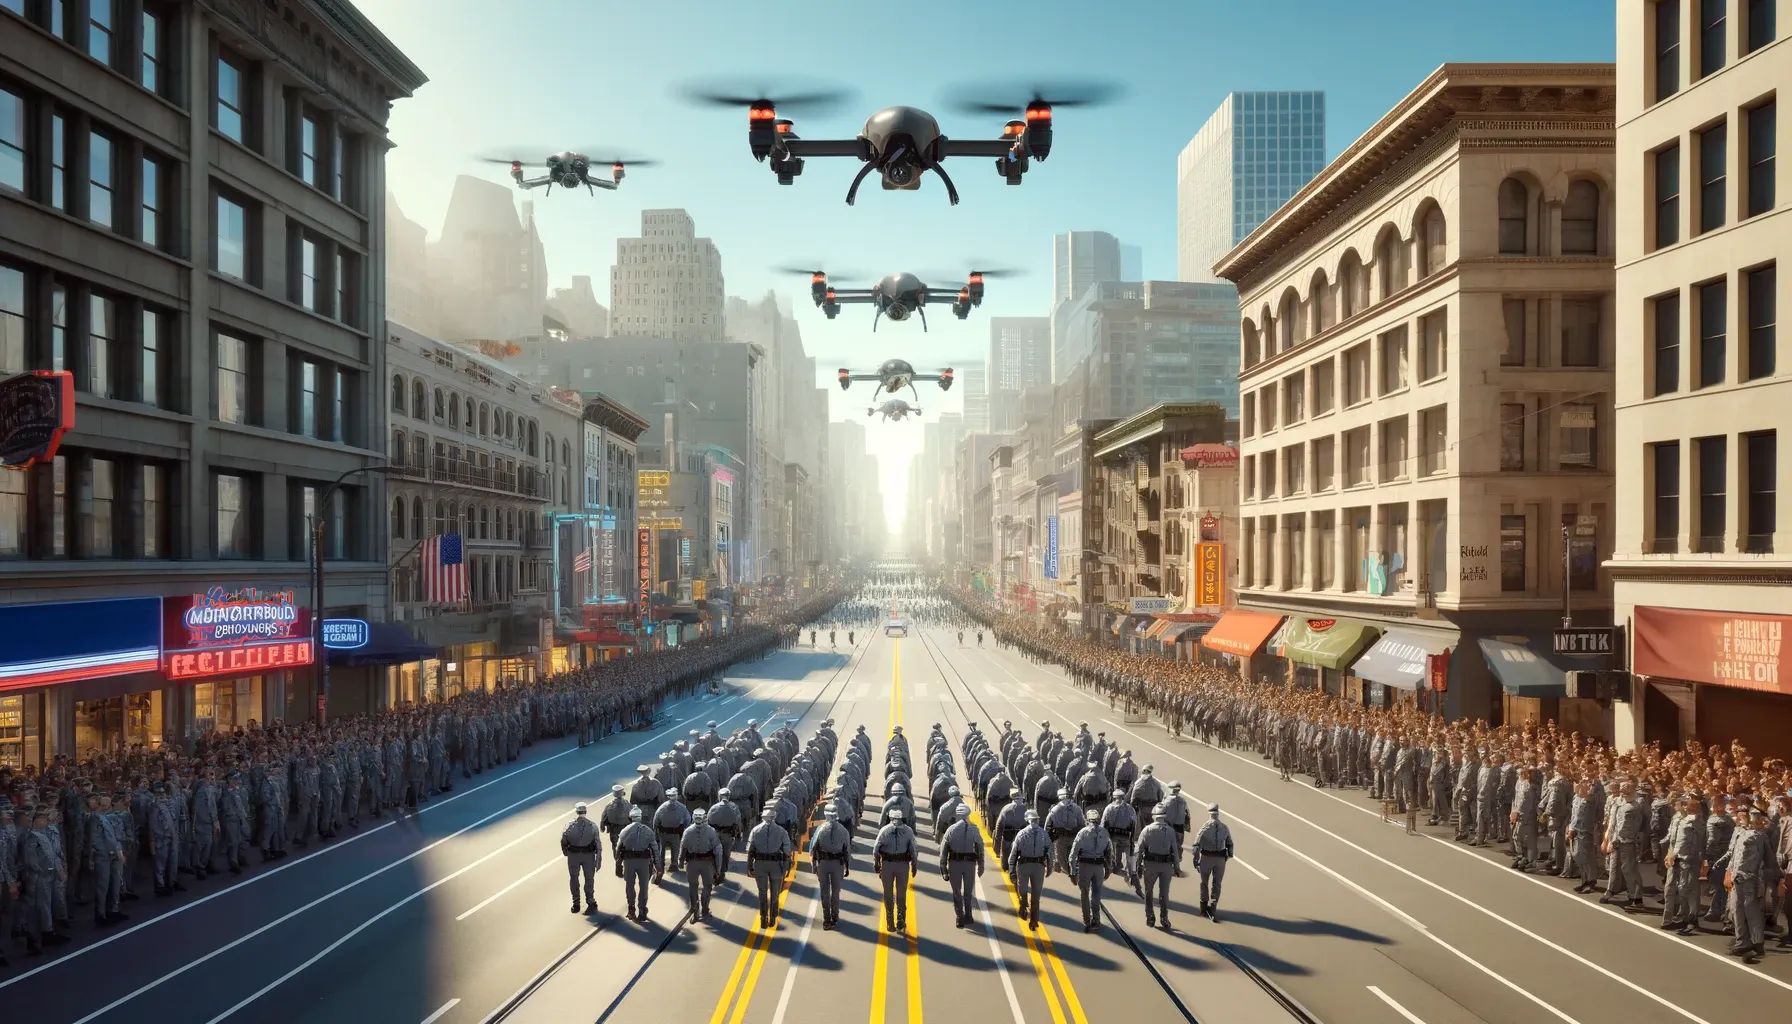 SFPD officers clad in gray march down market street, as drones fly overhead, during the Gray Pride Parade